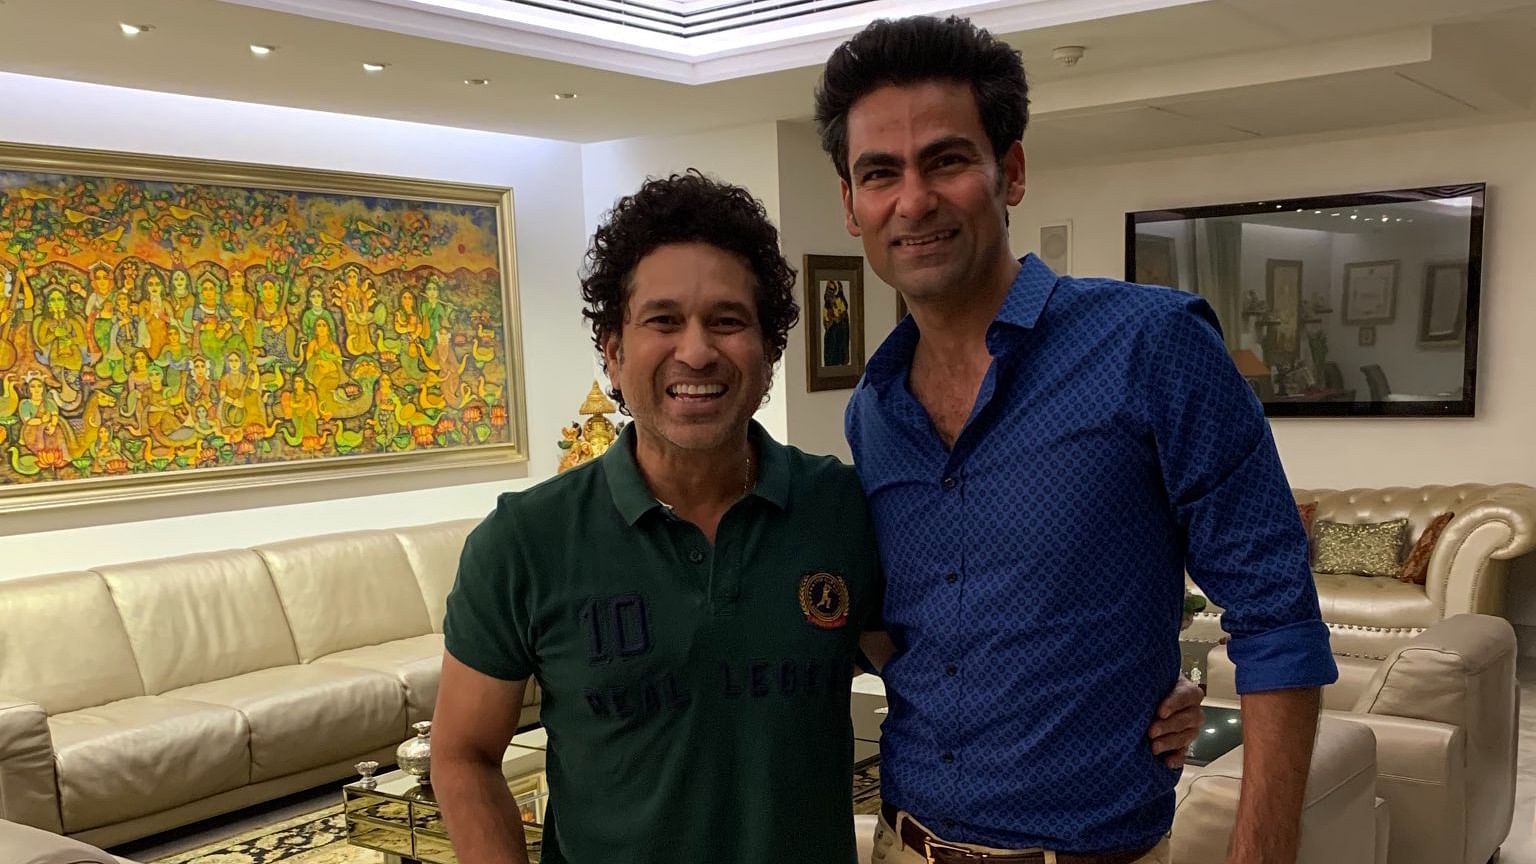 Former India cricketer Mohammad Kaif on Sunday, 12 January posted an image on Twitter with batting legend Sachin Tendulkar, who was termed as ‘Lord Krishna’ in it.